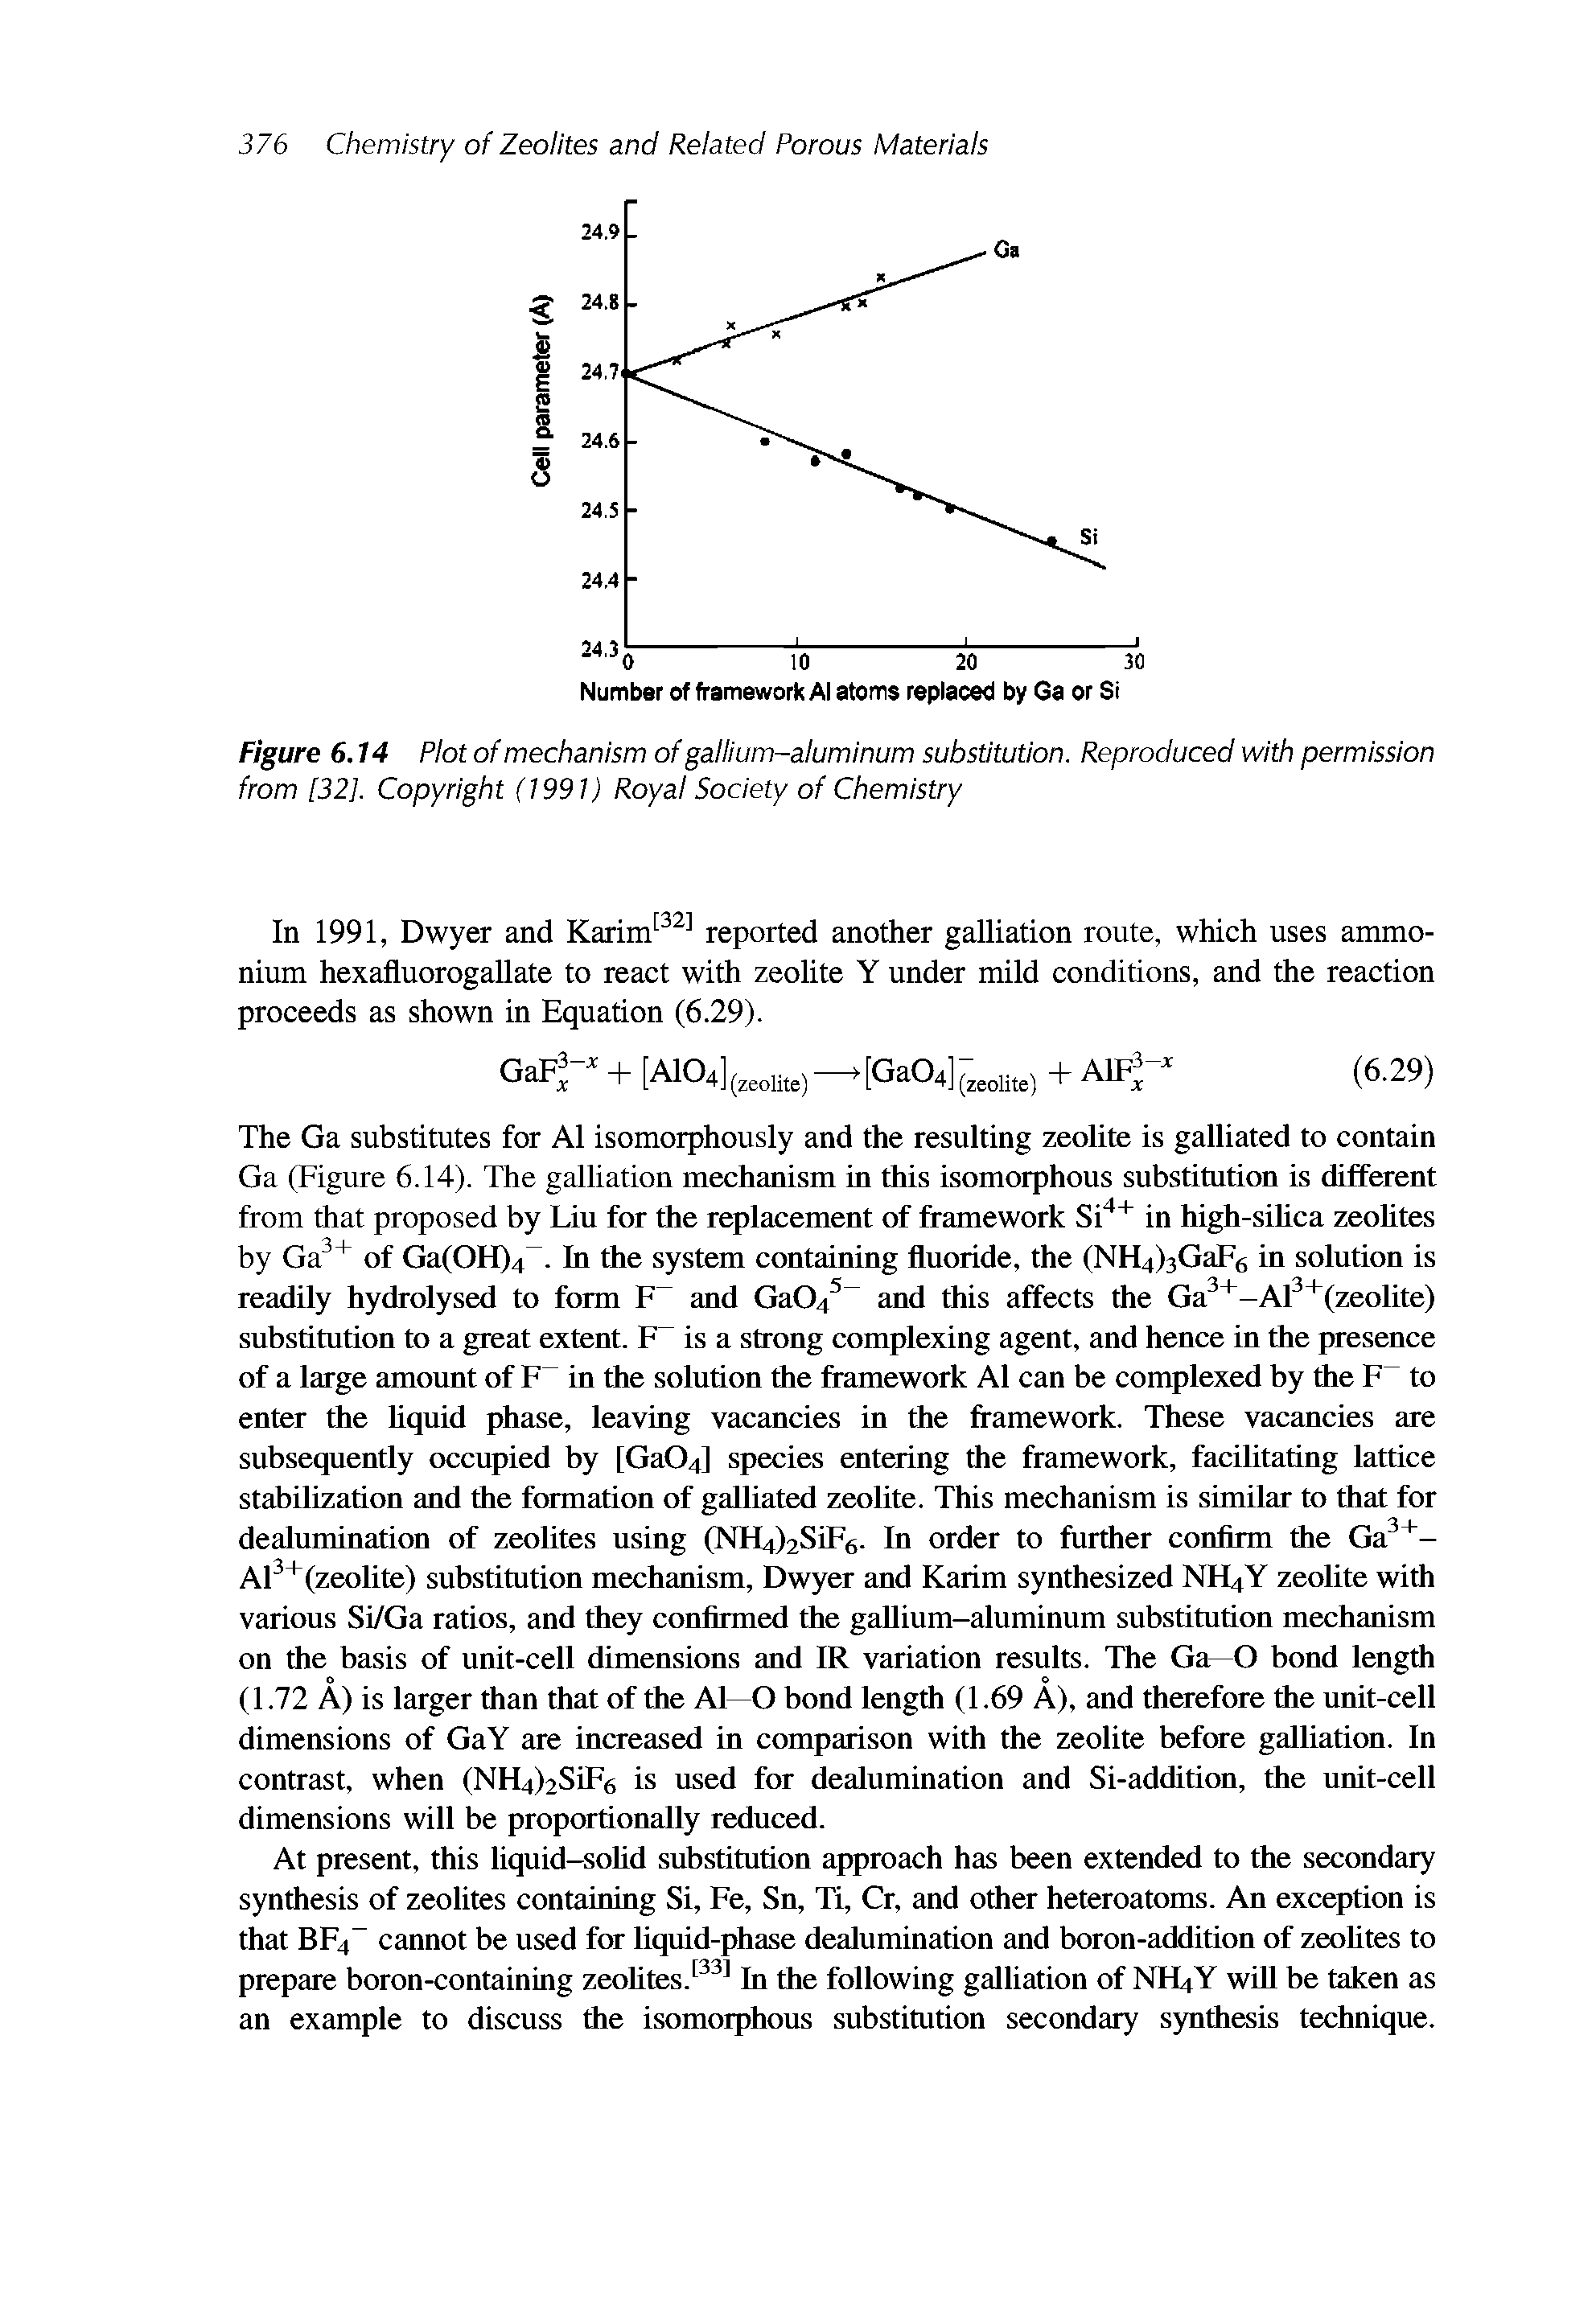 Figure 6.14 Plot of mechanism of gallium-aluminum substitution. Reproduced with permission from [32], Copyright (1991) Royal Society of Chemistry...